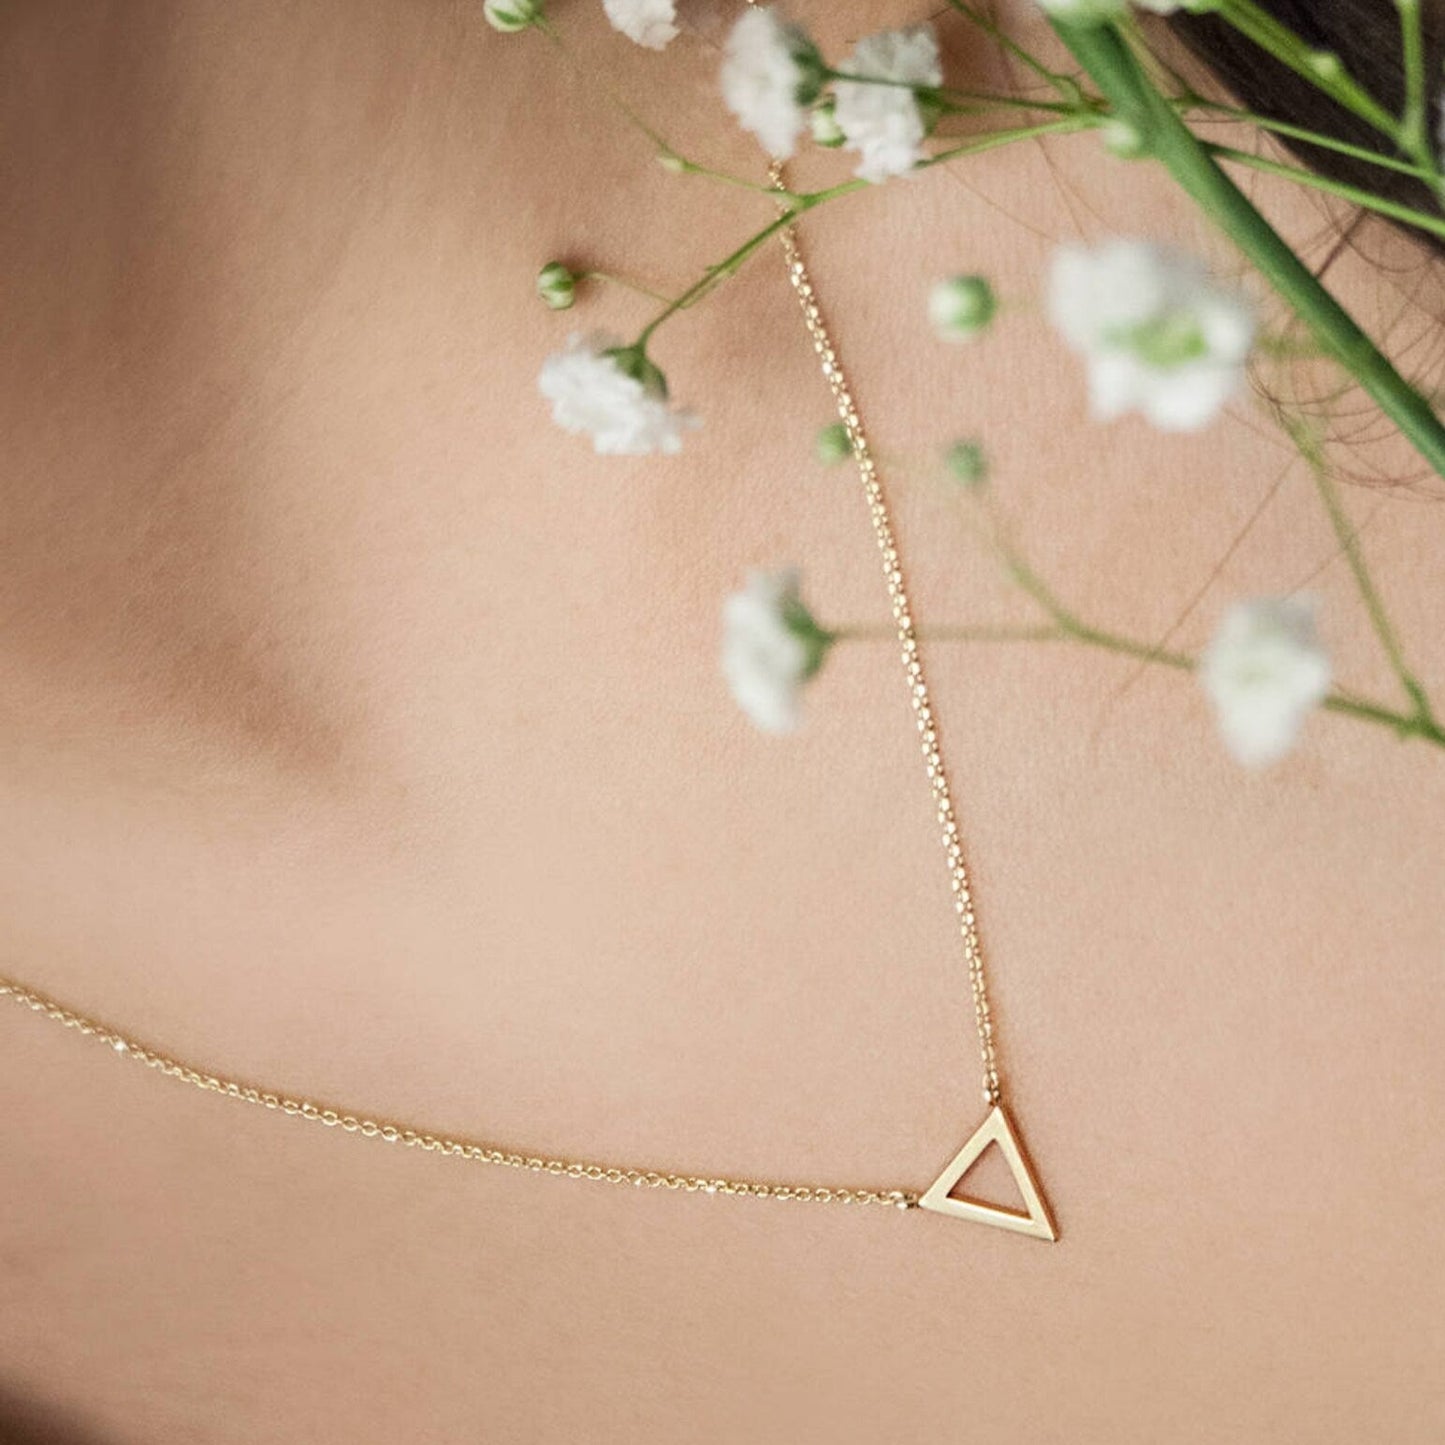 Enhance your style with the 18 Carat Gold Triangle Necklace from Burst of Arabia. A modern statement piece inspired by the timeless allure of Arabic jewelry, crafted for elegance in the UAE.